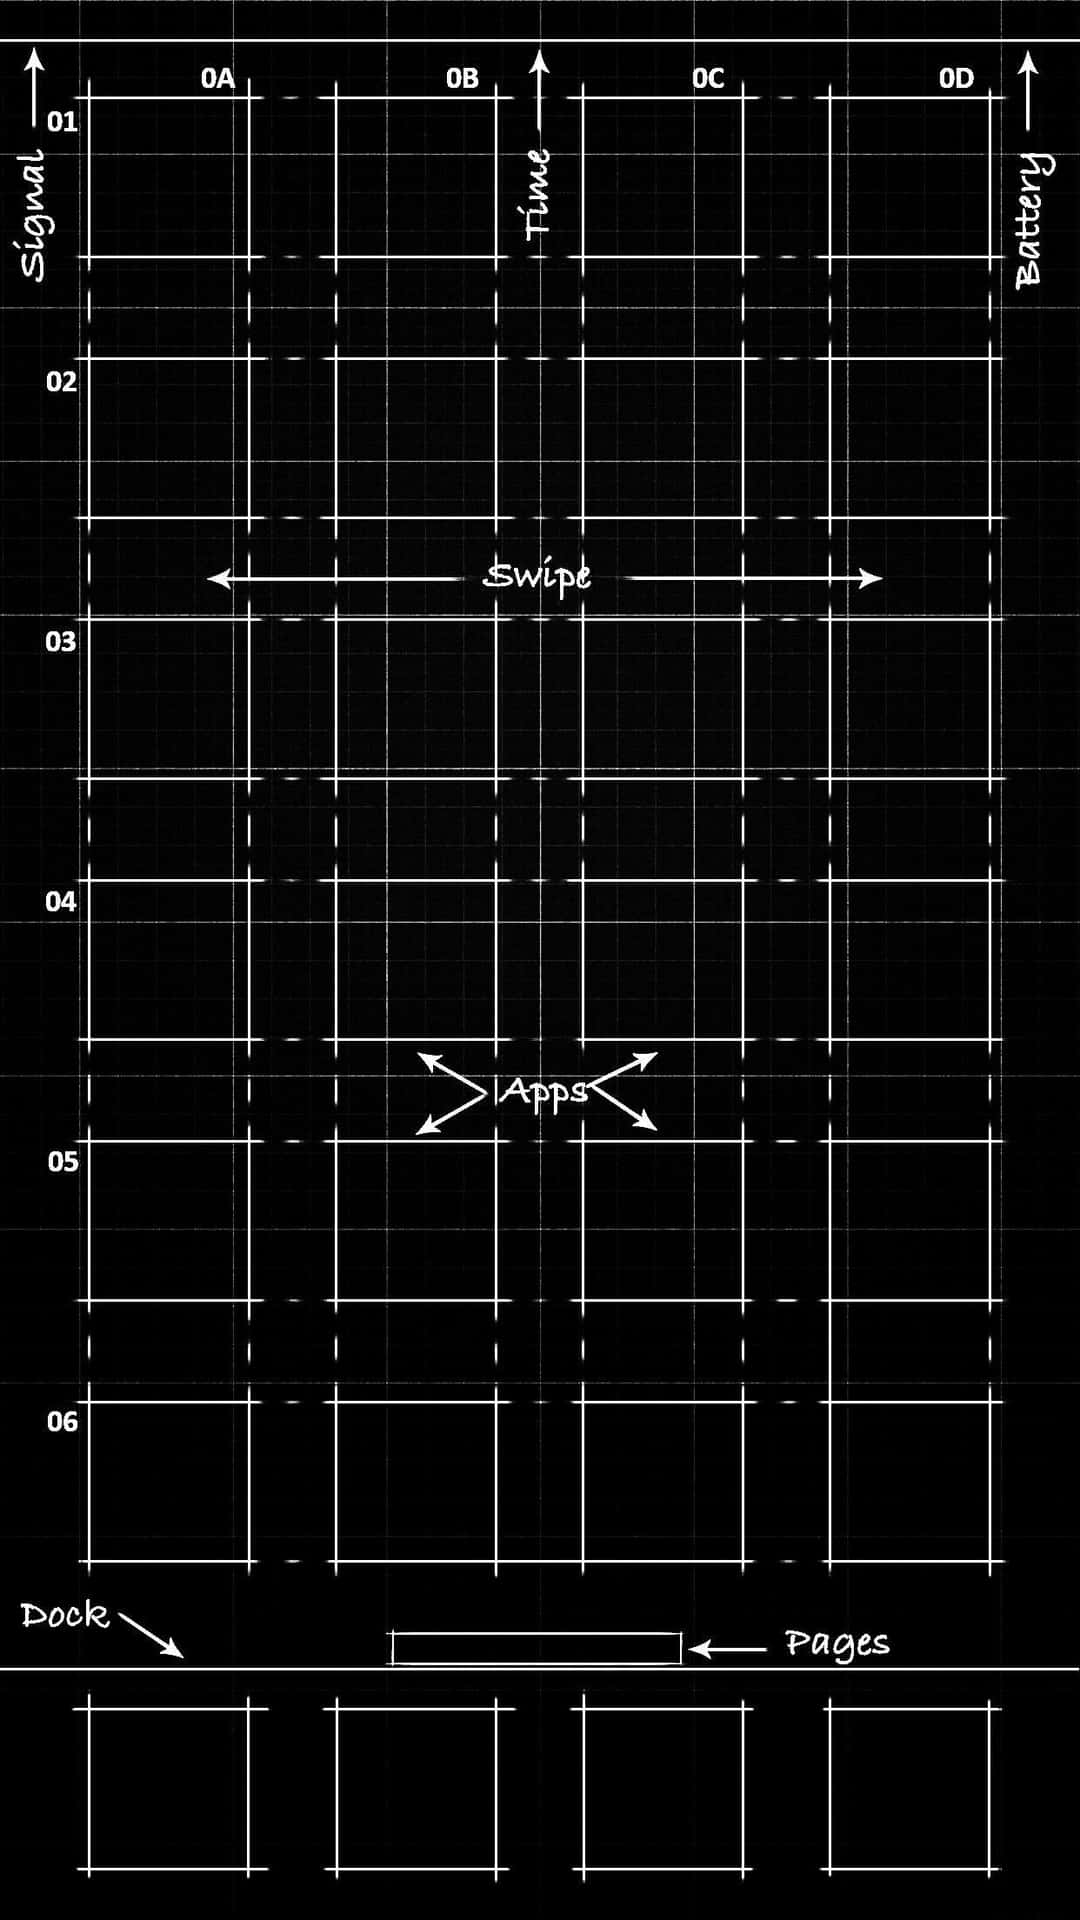 Abstract Grid Aesthetic Pattern for the Iphone Wallpaper